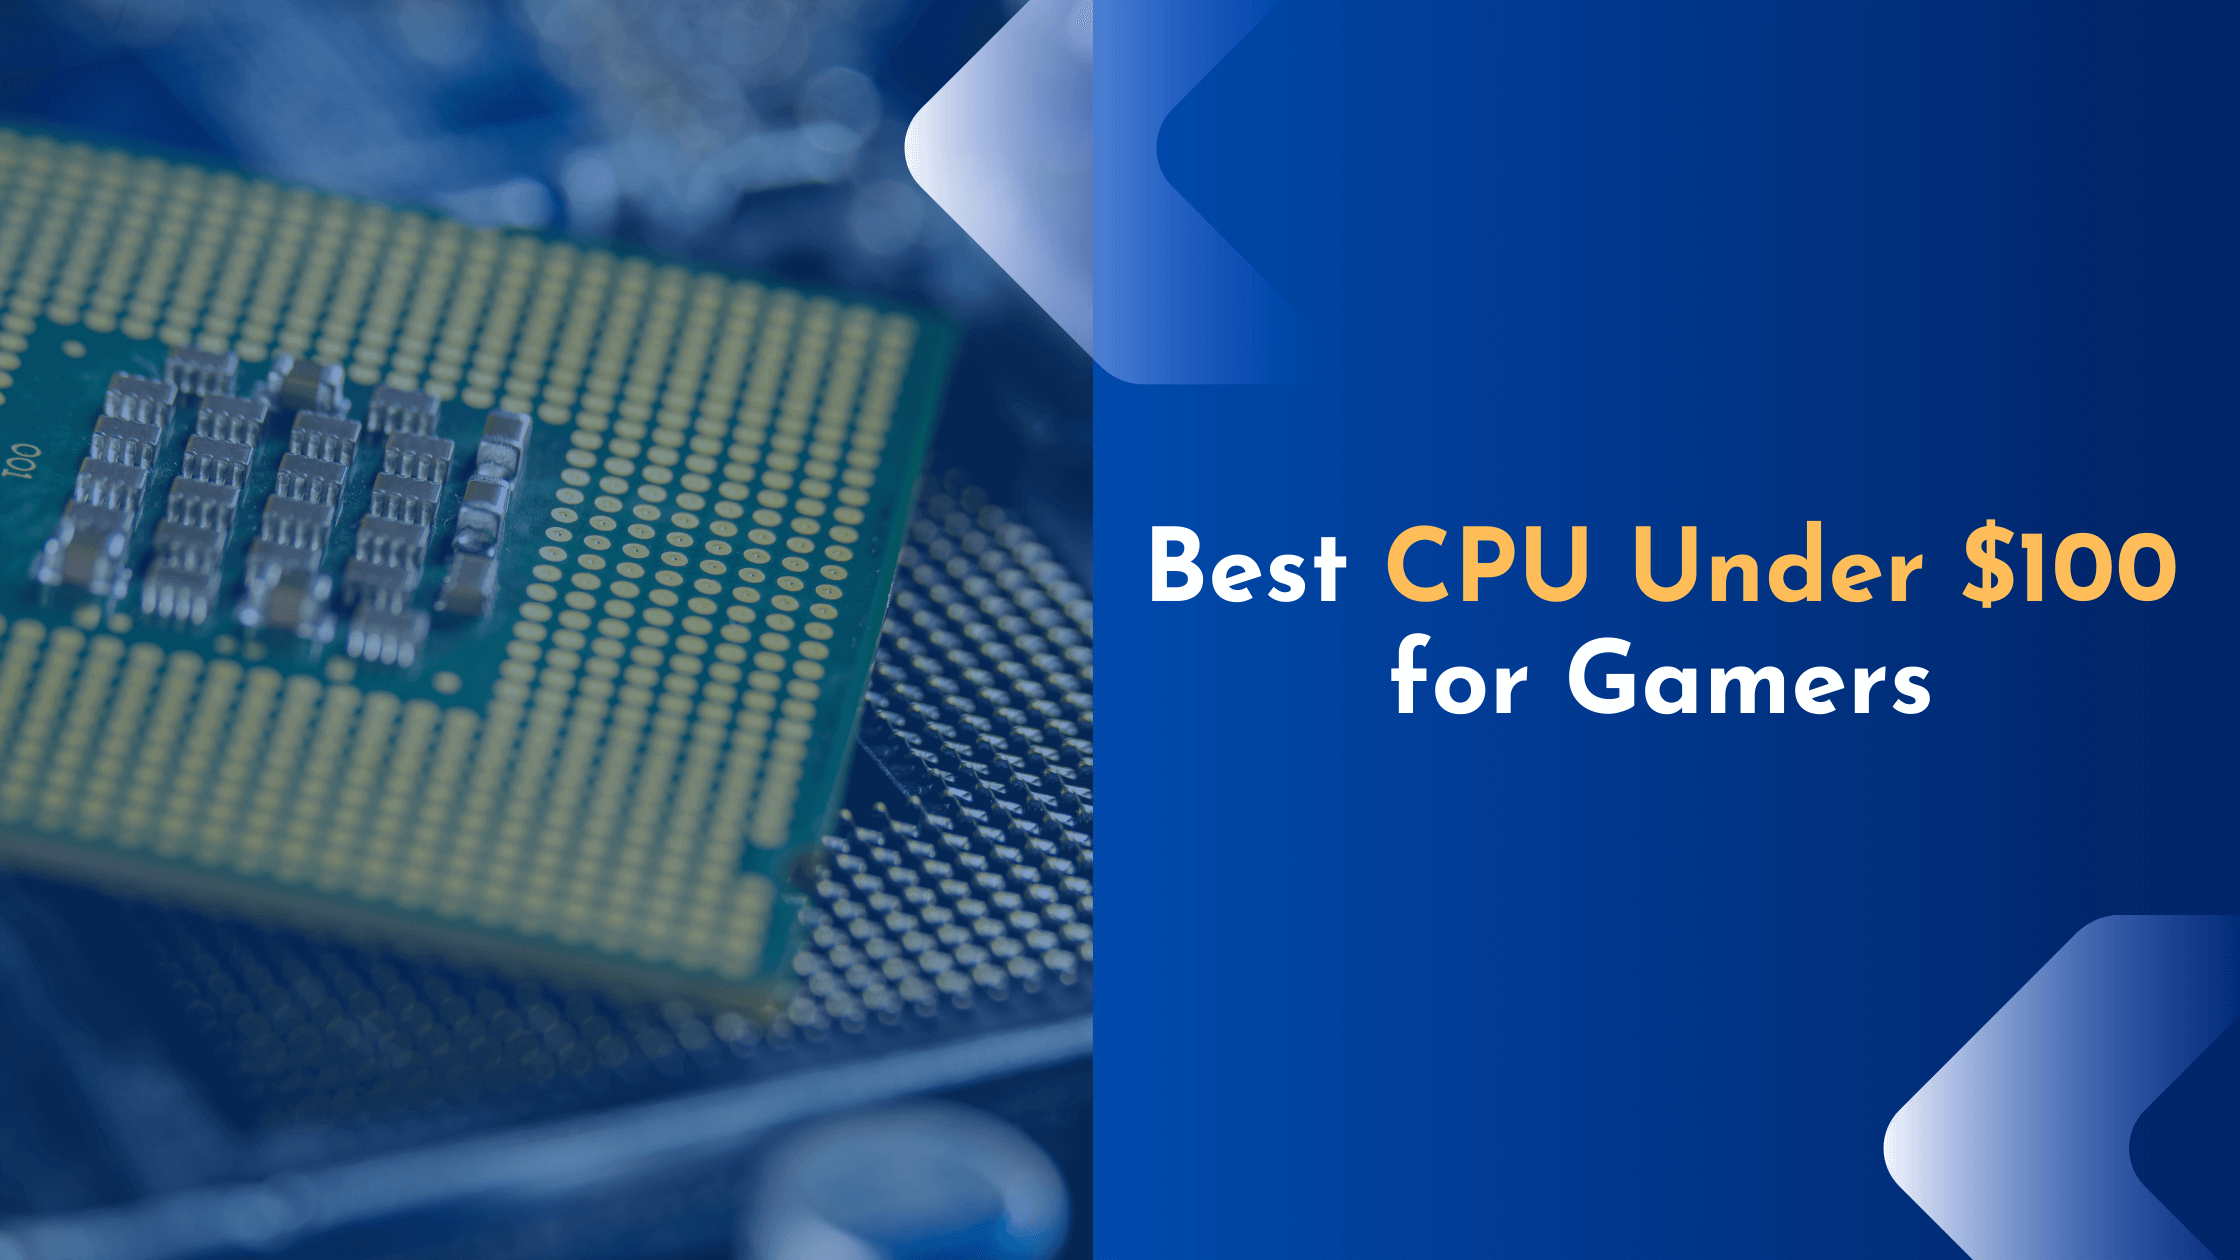 7 Best CPU Under $100 to Buy in 2022 (with Pros & Cons)